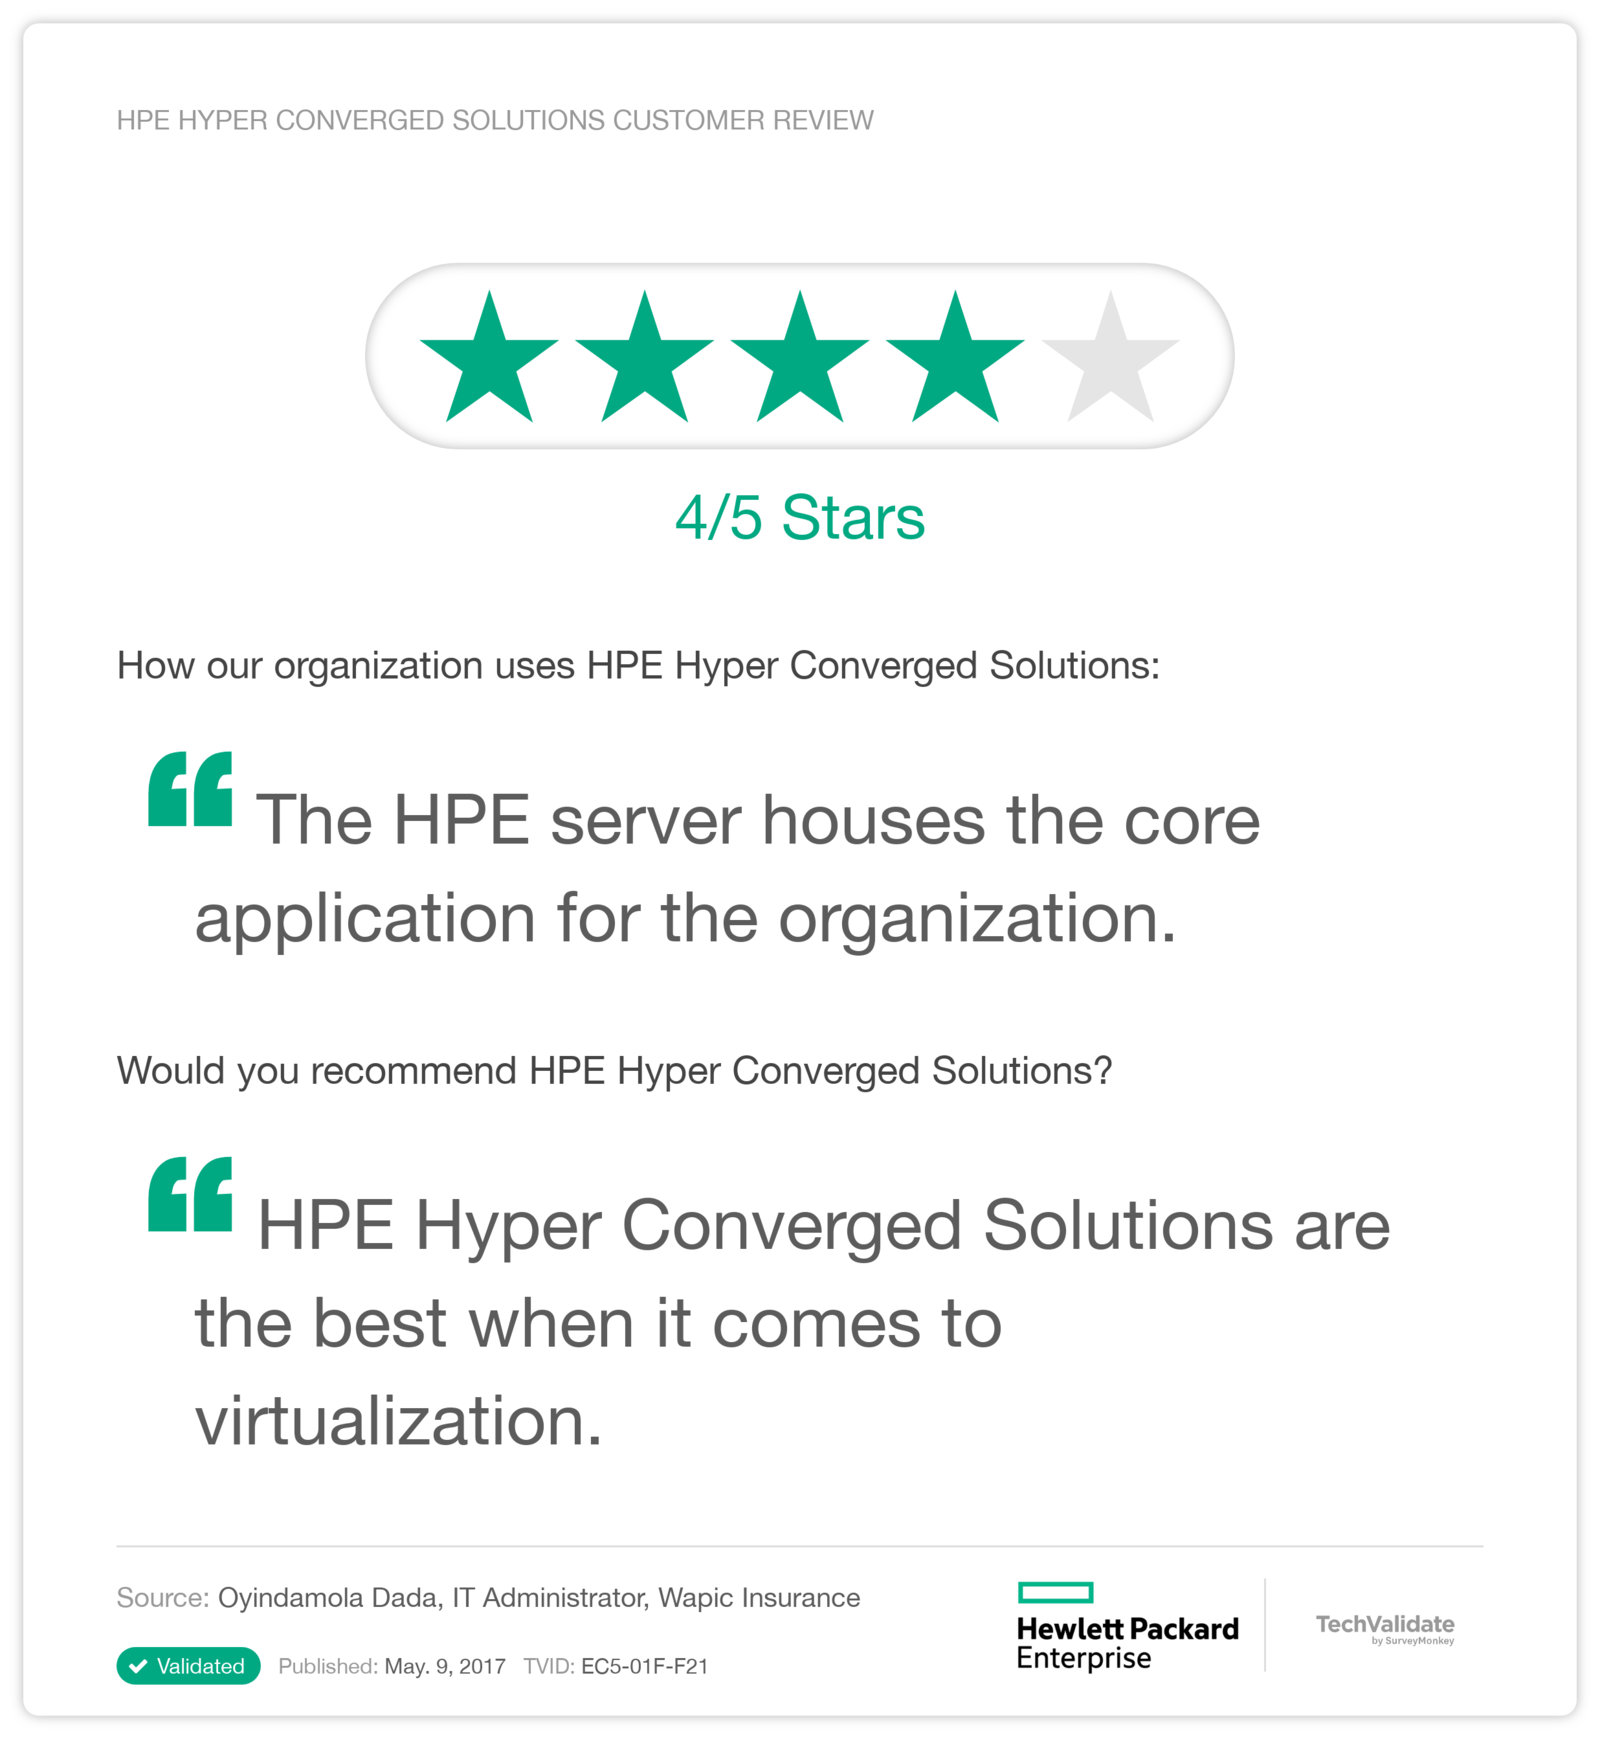 HPE Hyper Converged Solutions Customer Review